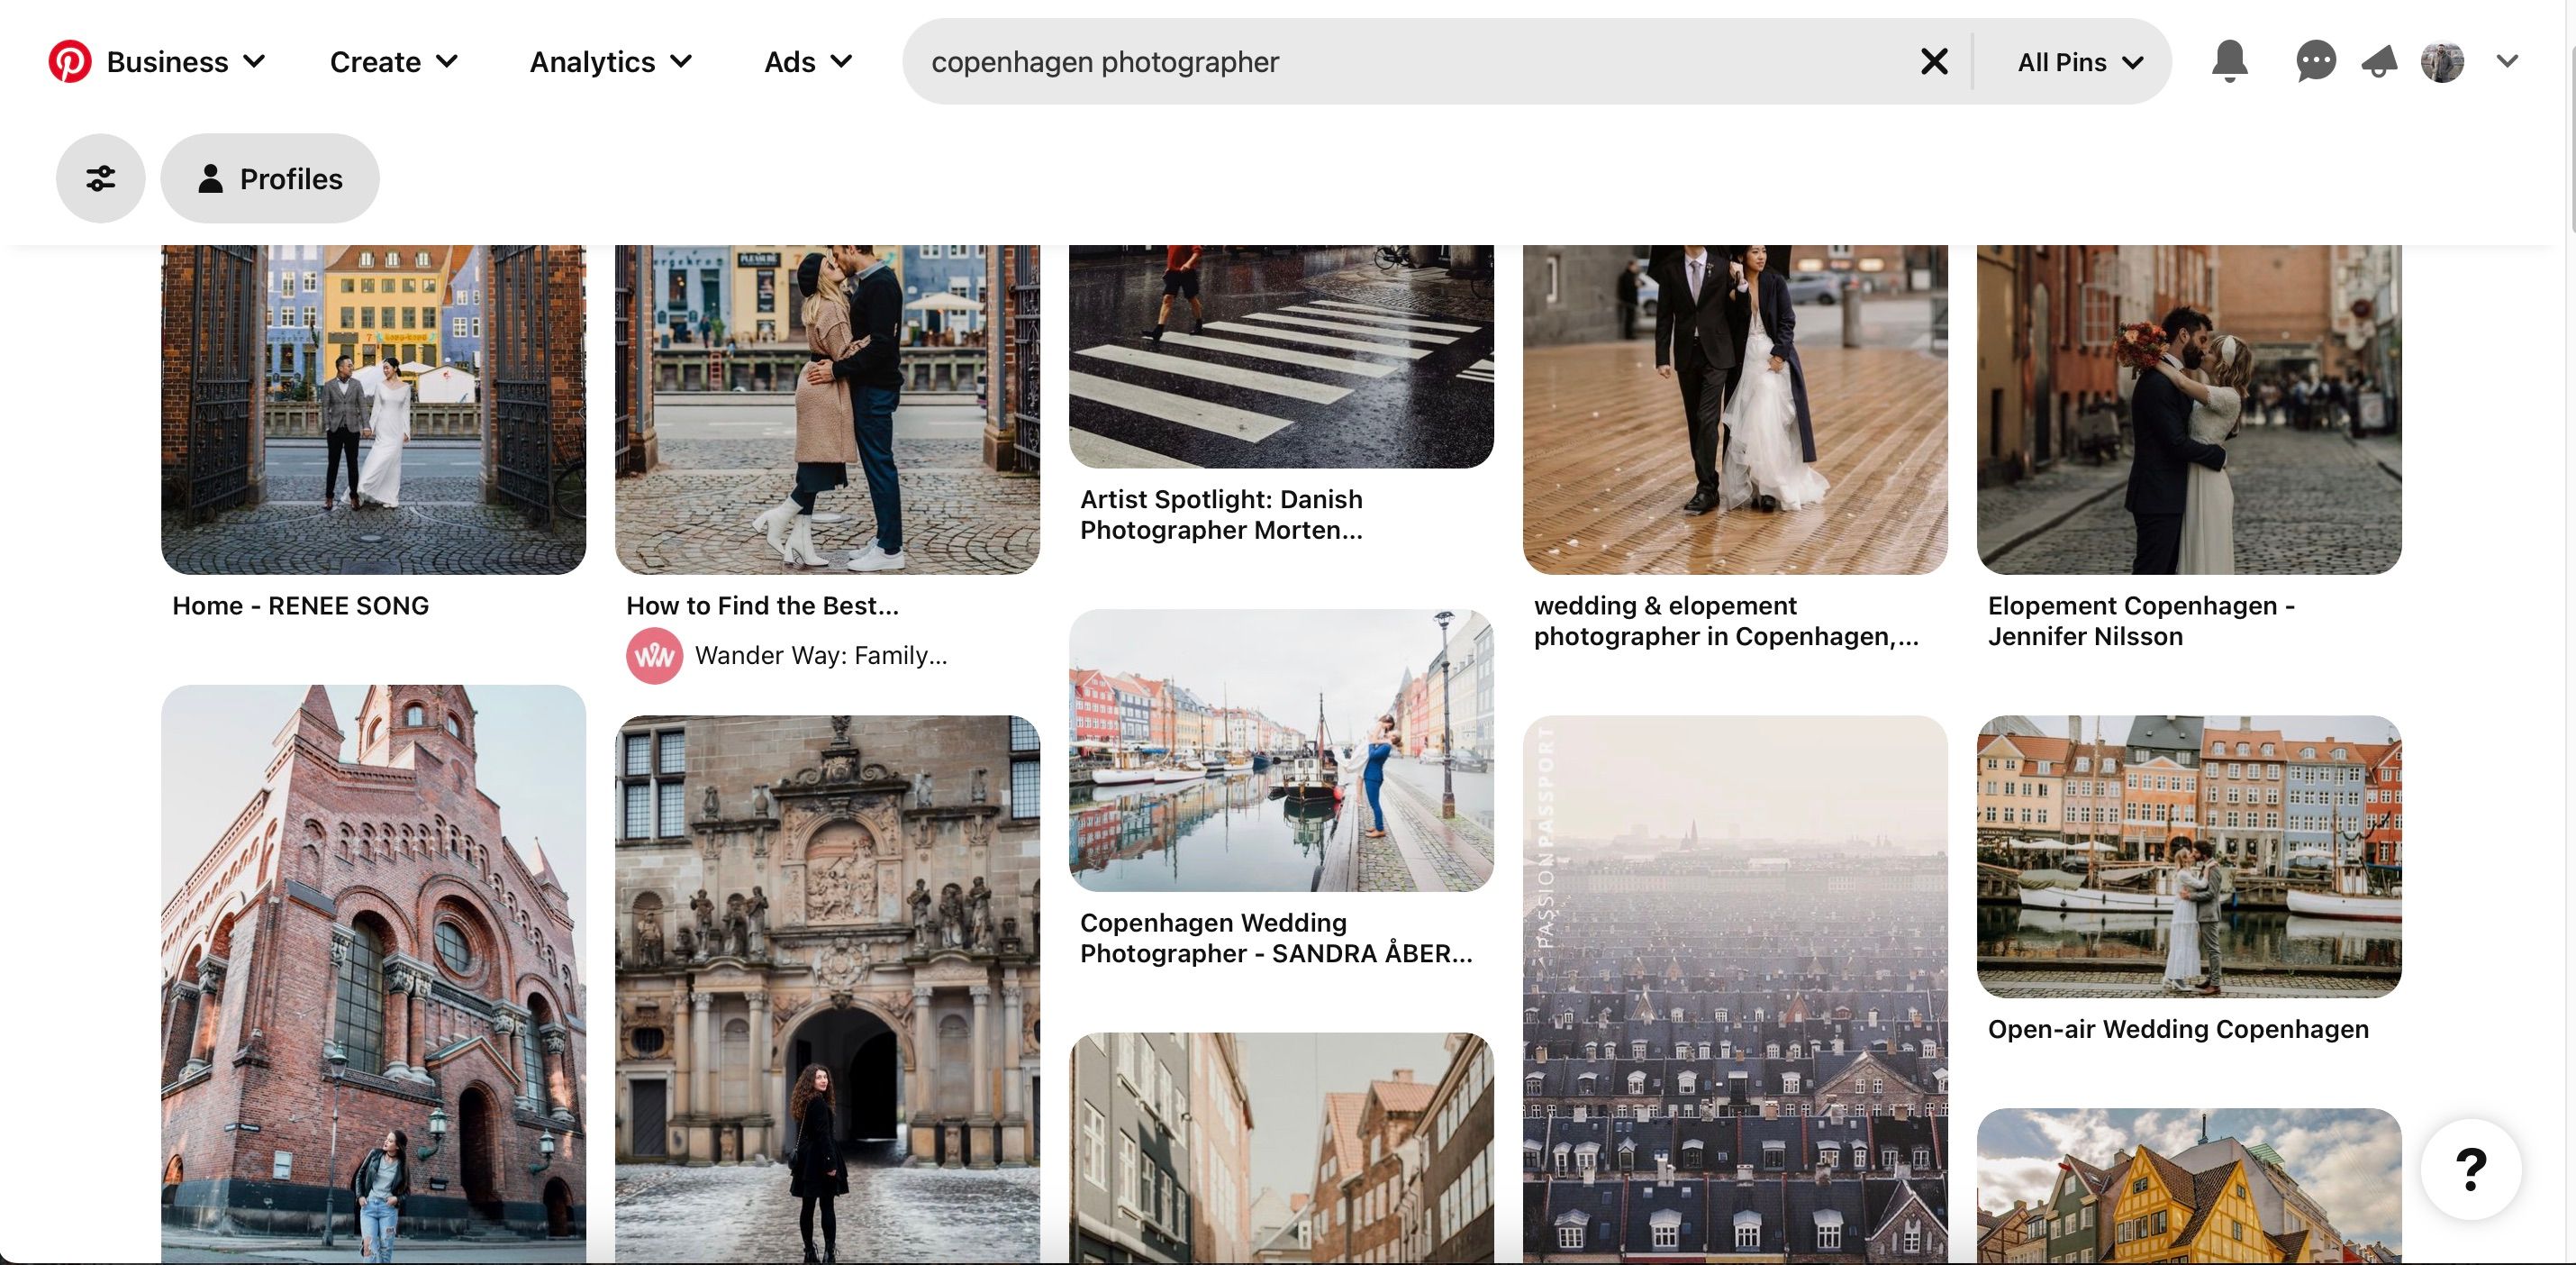 Search results on Pinterest for Copenhagen photographers